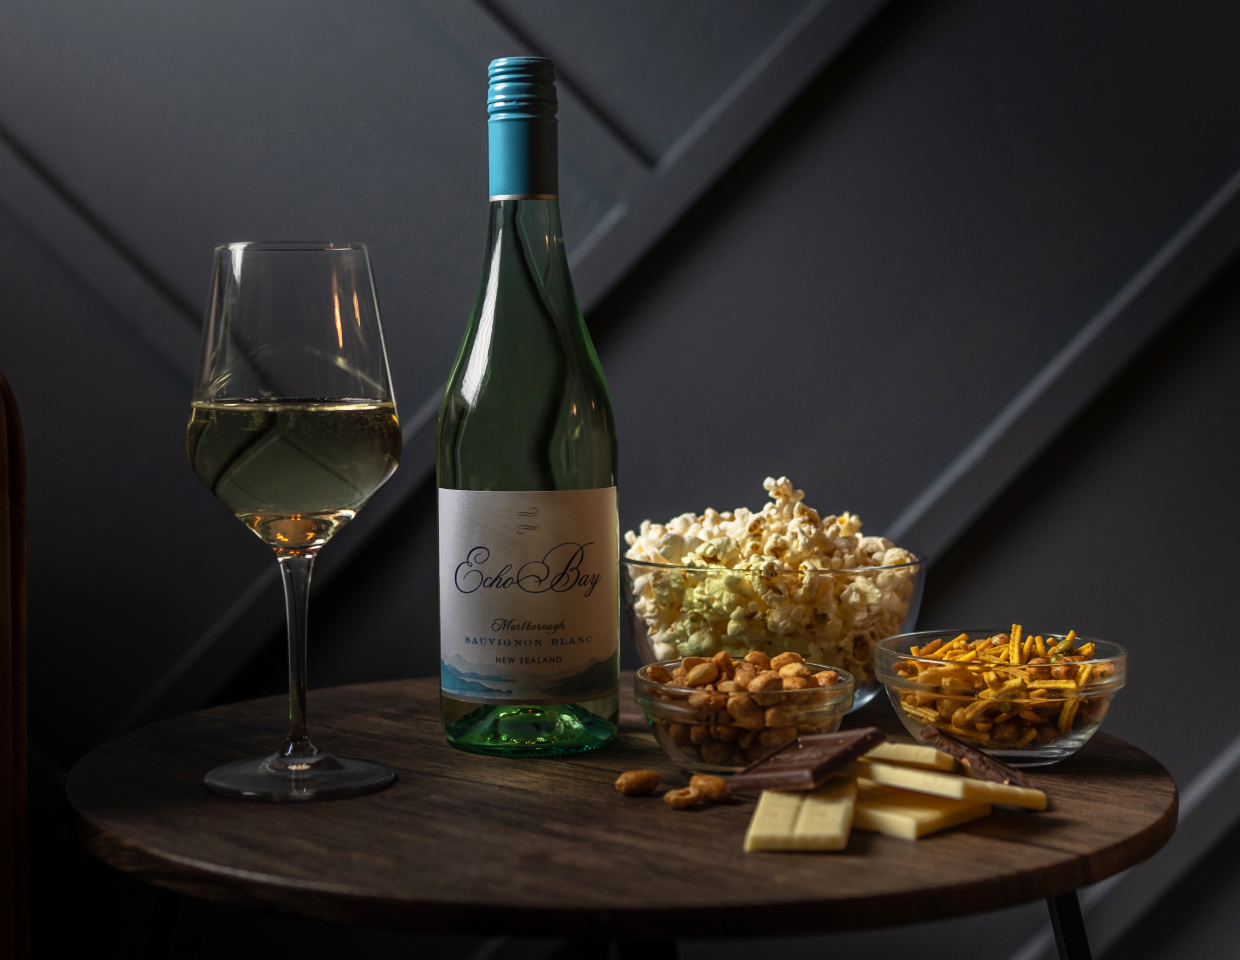 Bottle of Echo Bay Sauvignon Blanc on a table surrounded by bowls of popcorn and pretzels and chocolate bars